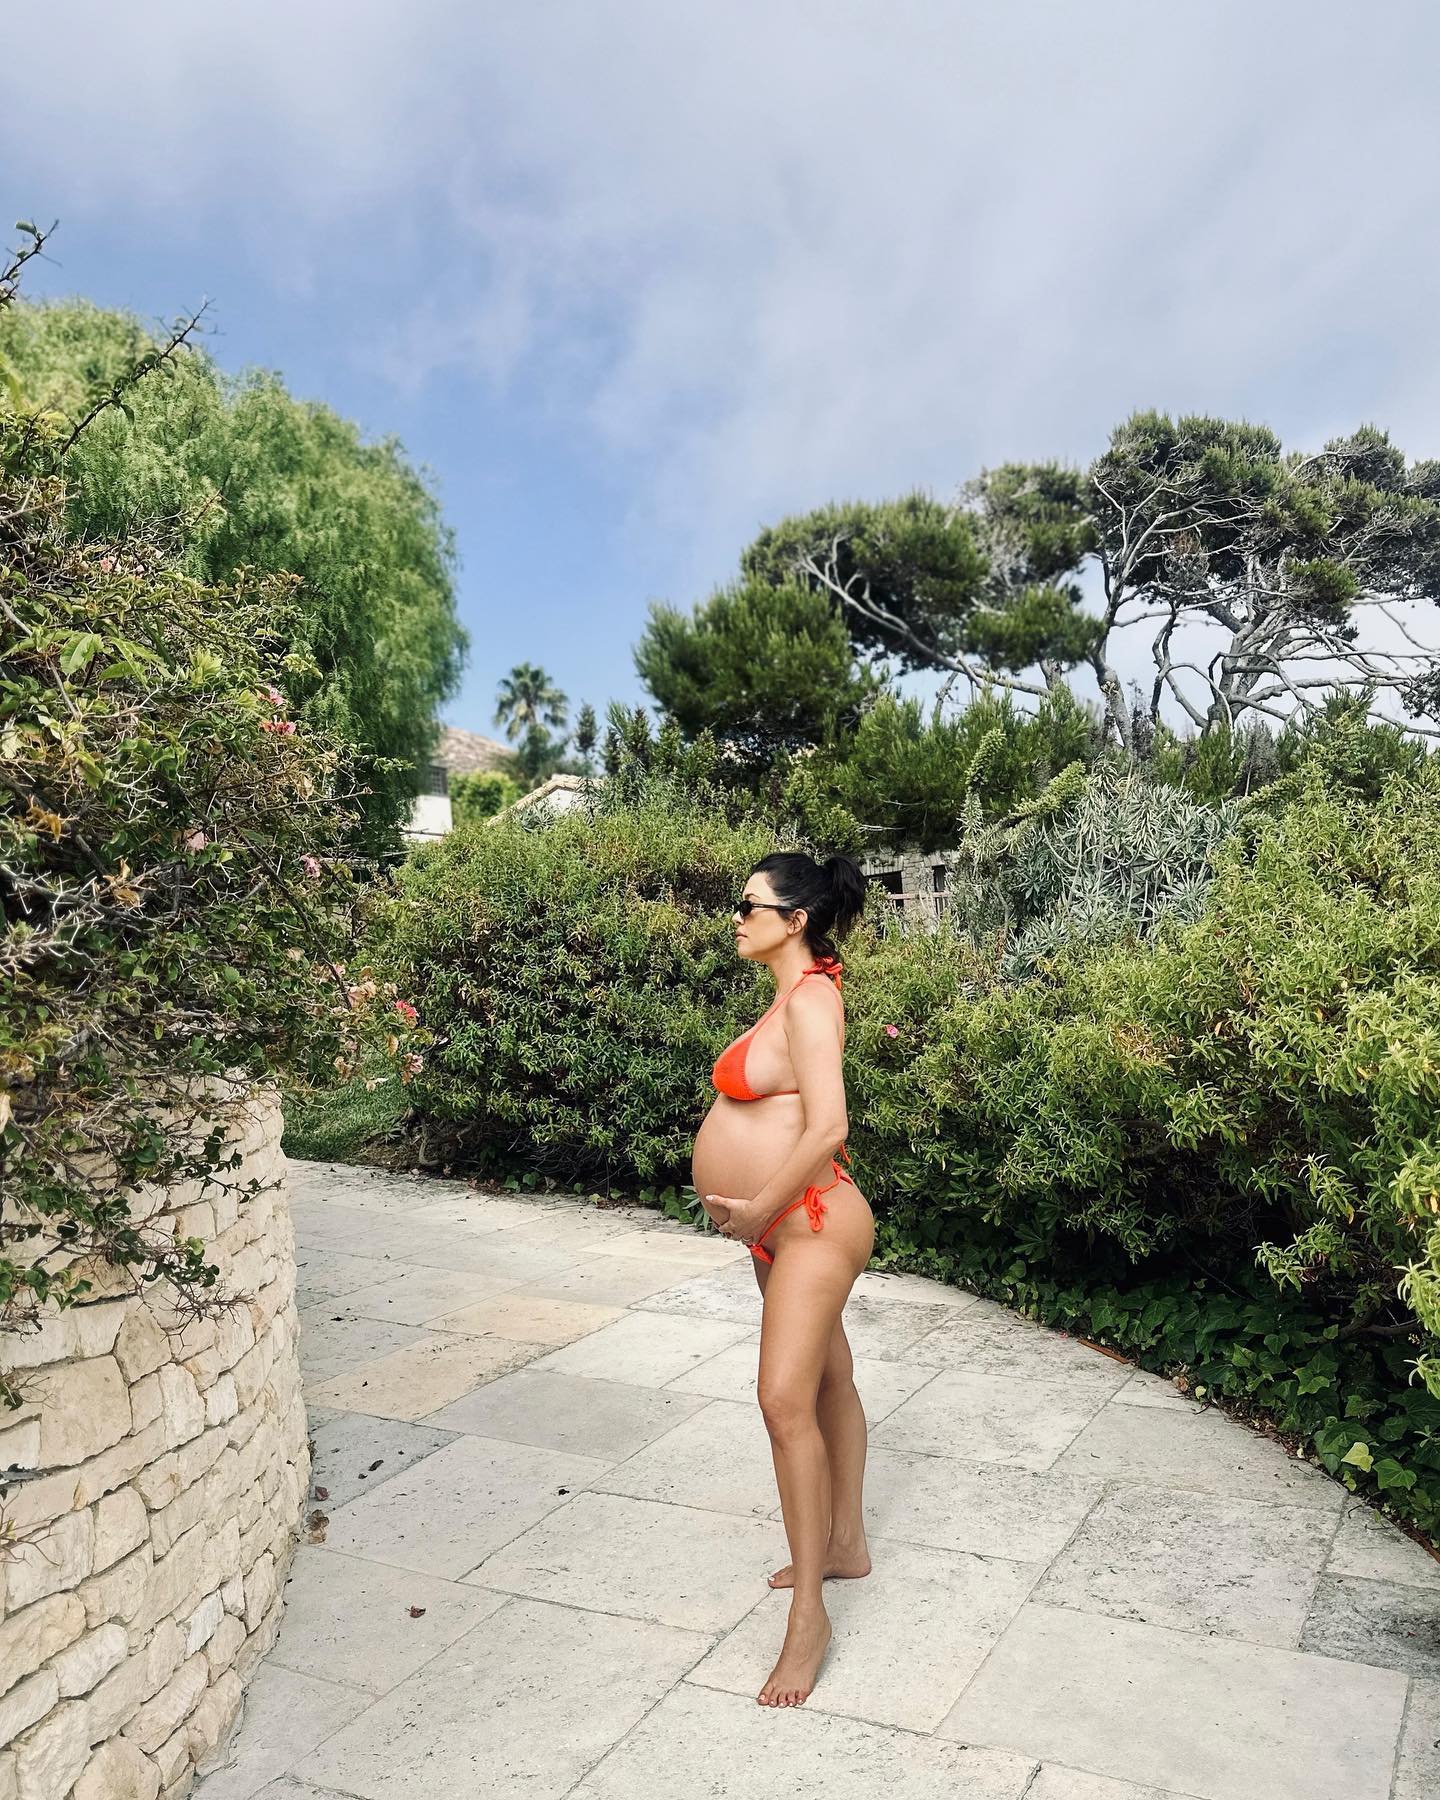 Kourtney Kardashian recently posted this image to Instagram, writing in the caption: "Growing you inside of me, my son, is the greatest blessing, honor and joy."